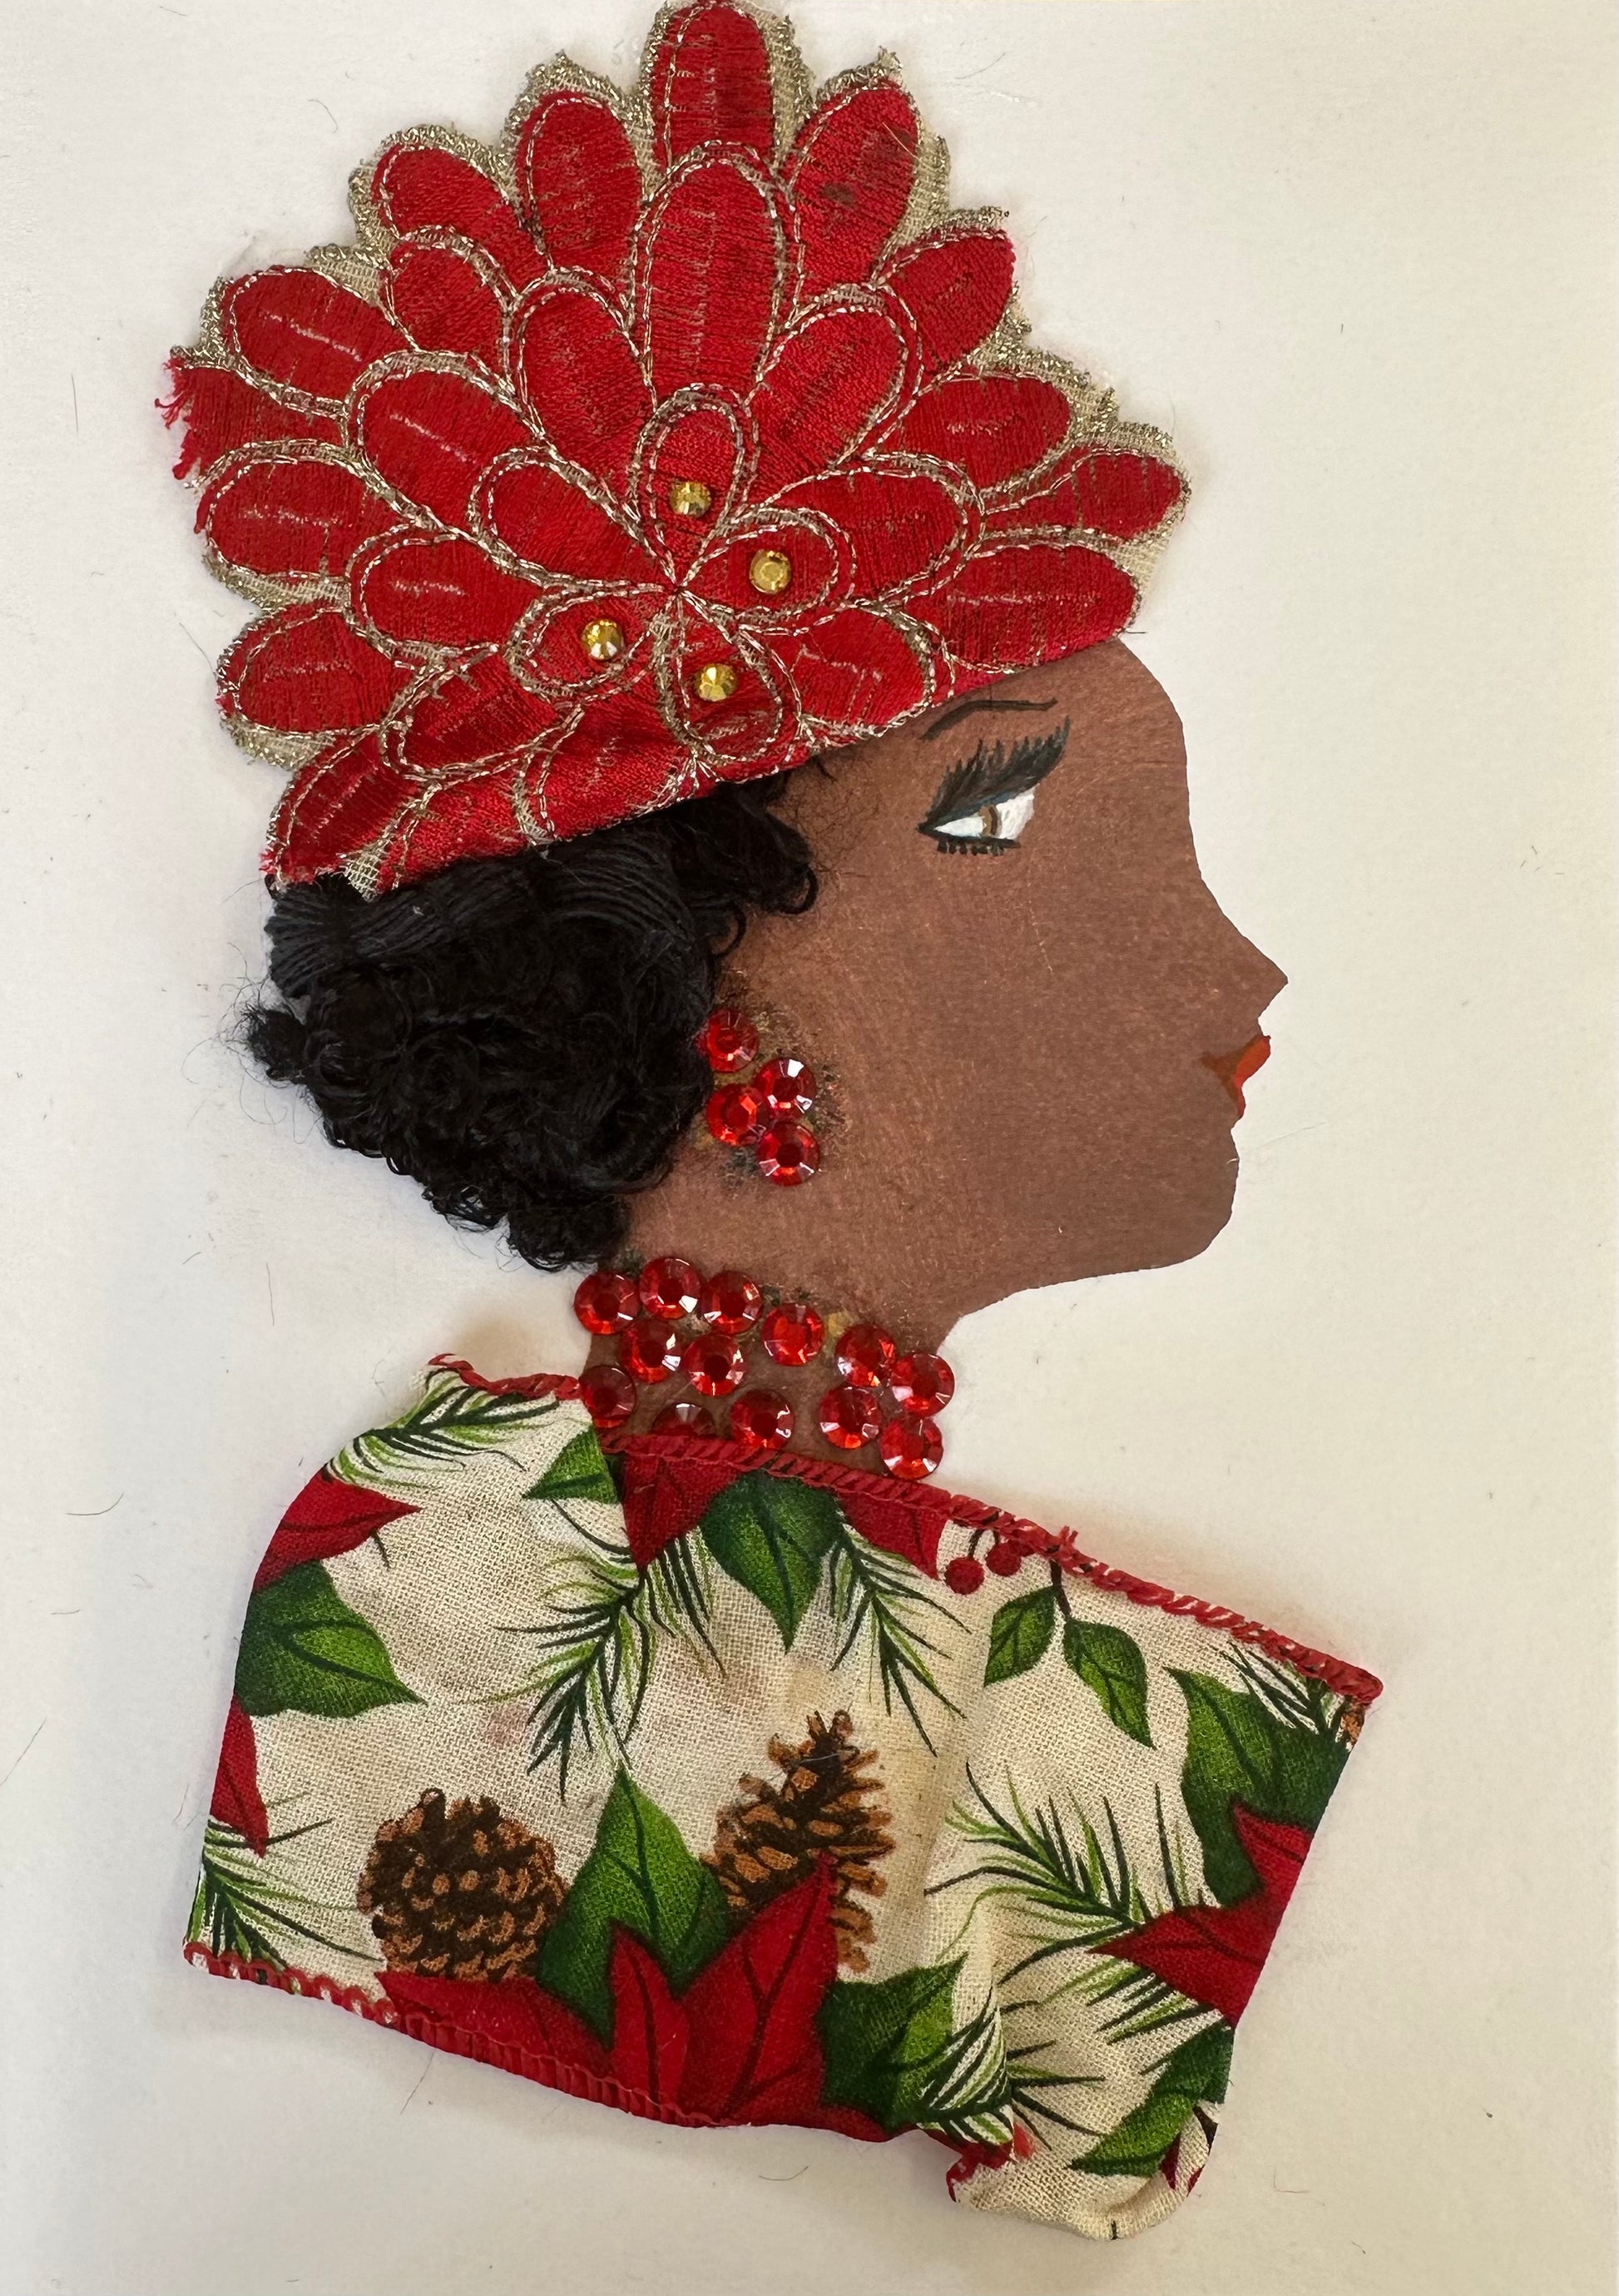 I designed this handmade card of Paddington Phoebe. She is wearing a beige coloured blouse with a red trim and patterned with poinsettias and pine cones. Her hatinator is a red flower like shape with gold outlines. The outfit is completed with ruby red, gemstone jewellery.